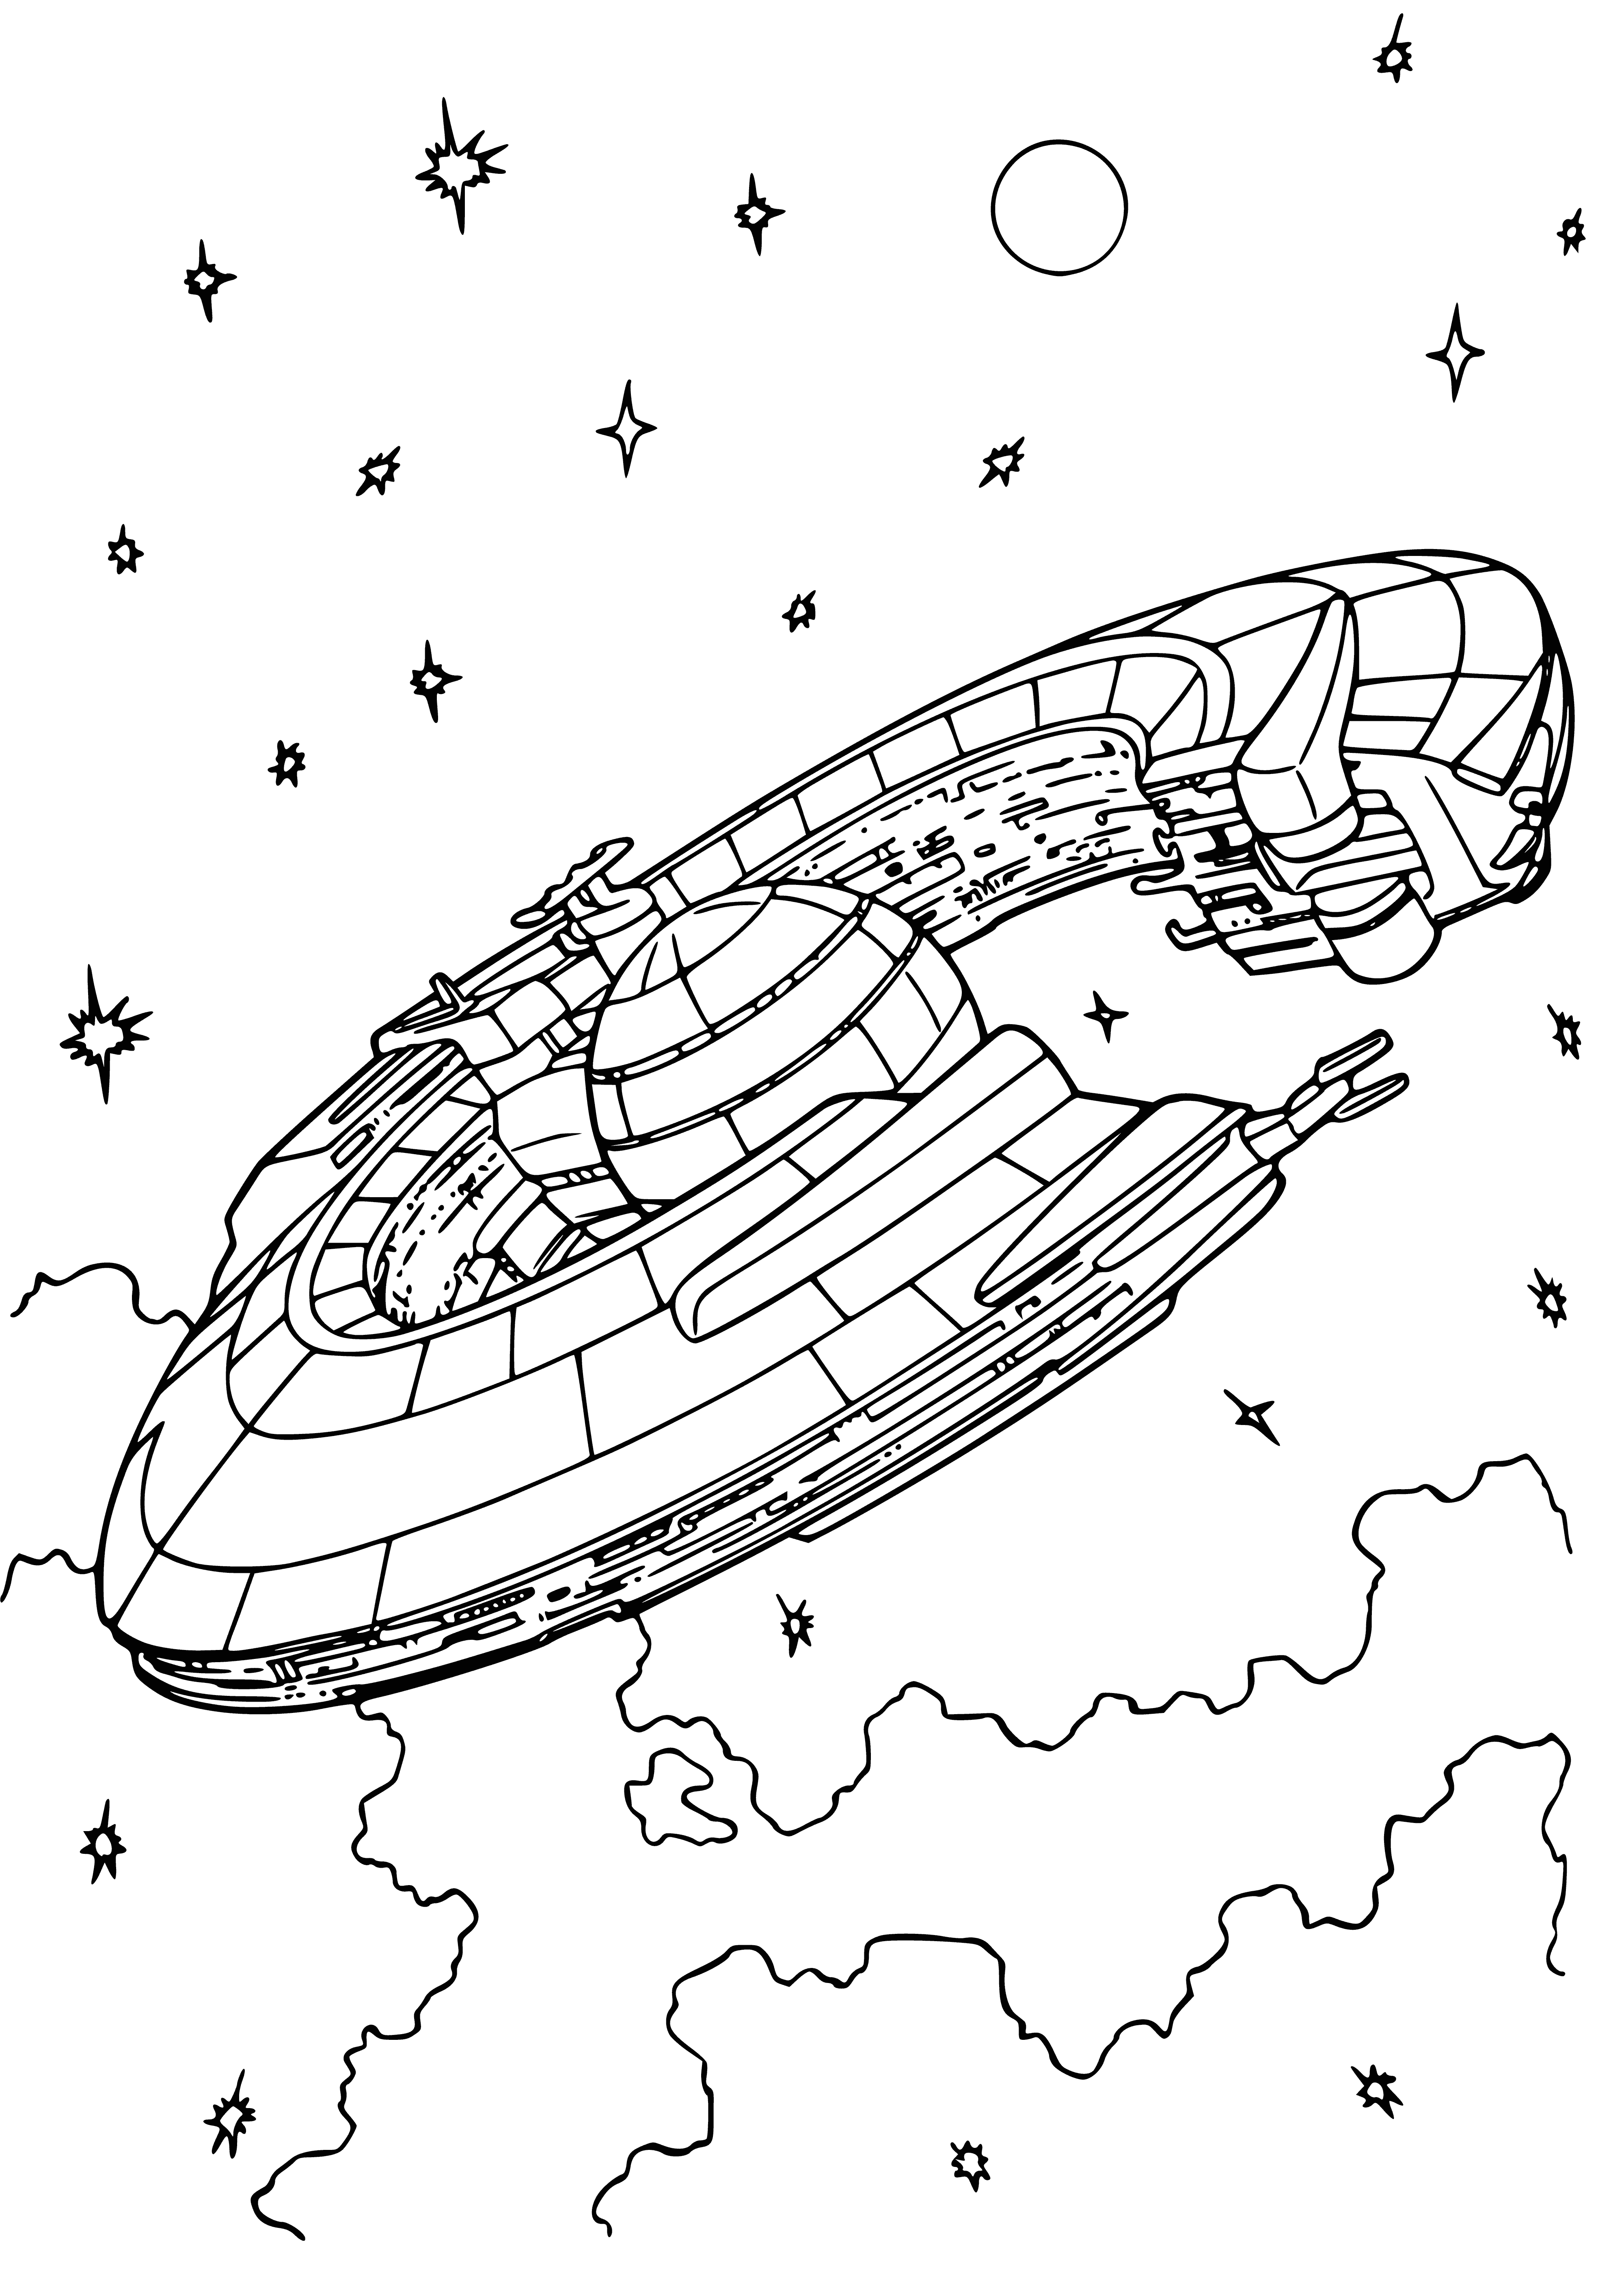 coloring page: Large space station in center of frame has round main section, several round modules and a bright white light shining from center. Stars in background. #space #astronomy